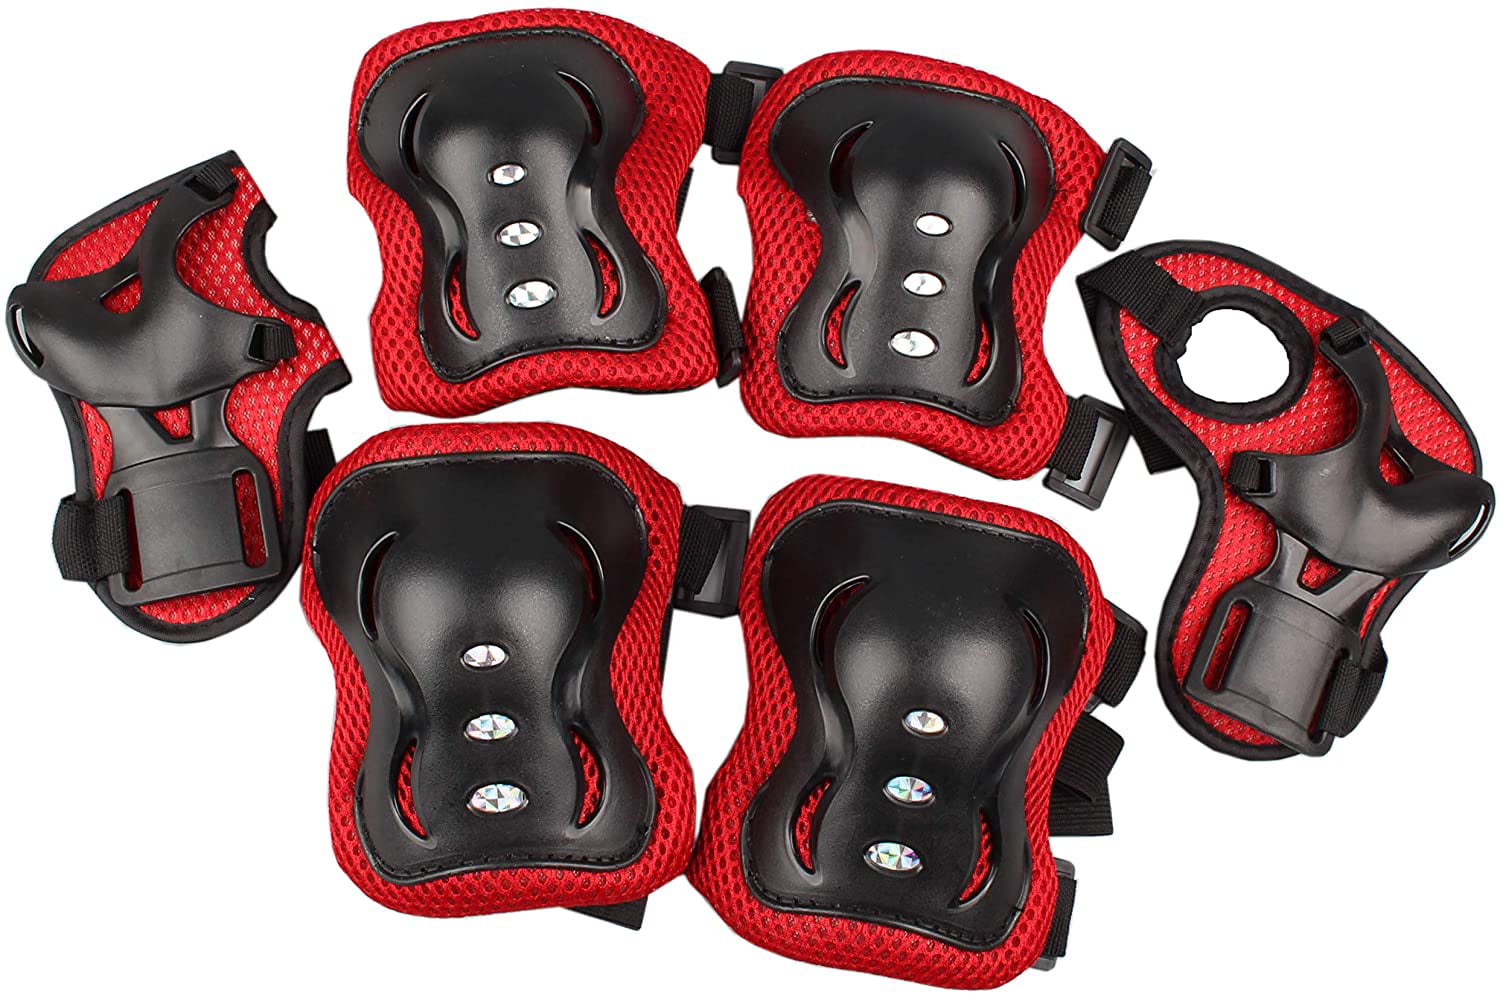 6 Pcs Bike Protective Gear Kids Scooter Cycling Skating Kids Protective Gear Set Knee Pads Elbow Pads Wrist Guards 3 in 1 Safety Pads Set for Kids 3-8 Years Old 